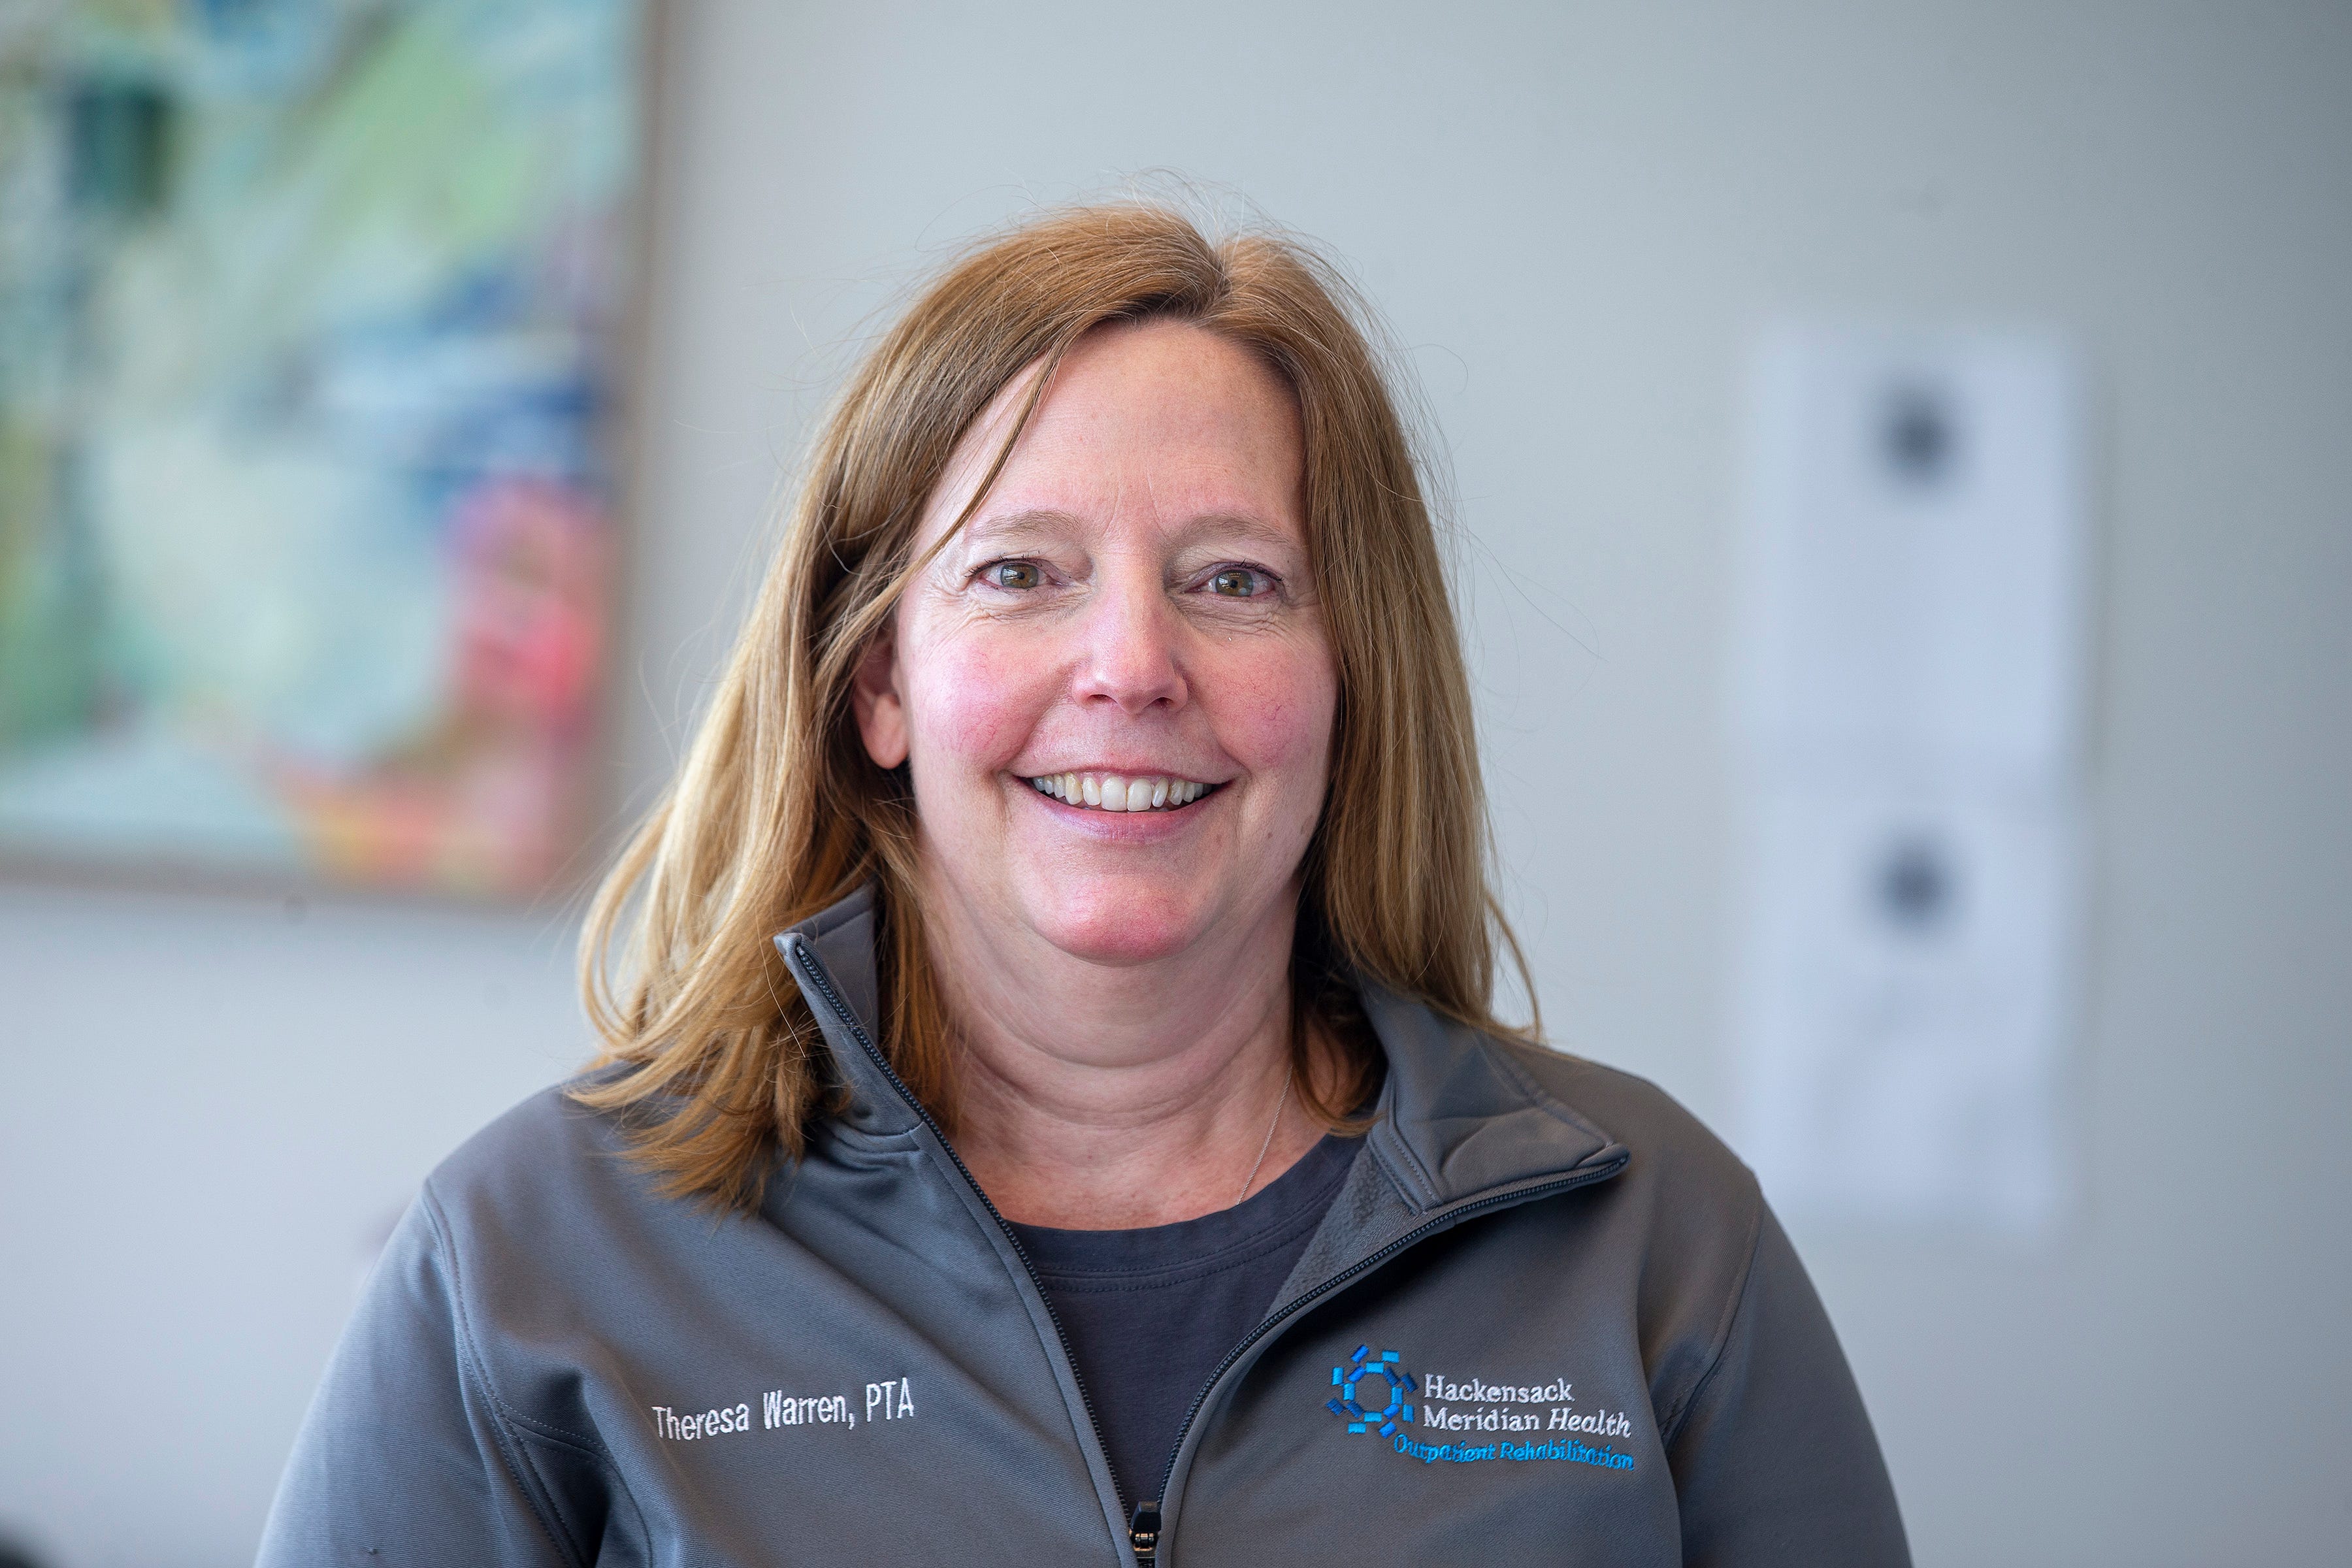 Theresa Warren, physical therapist assistant, talks about working through the COVID-19 pandemic and the impact it has had on her life at Ocean University Medical Center in Brick, NJ Friday, February 11, 2022.